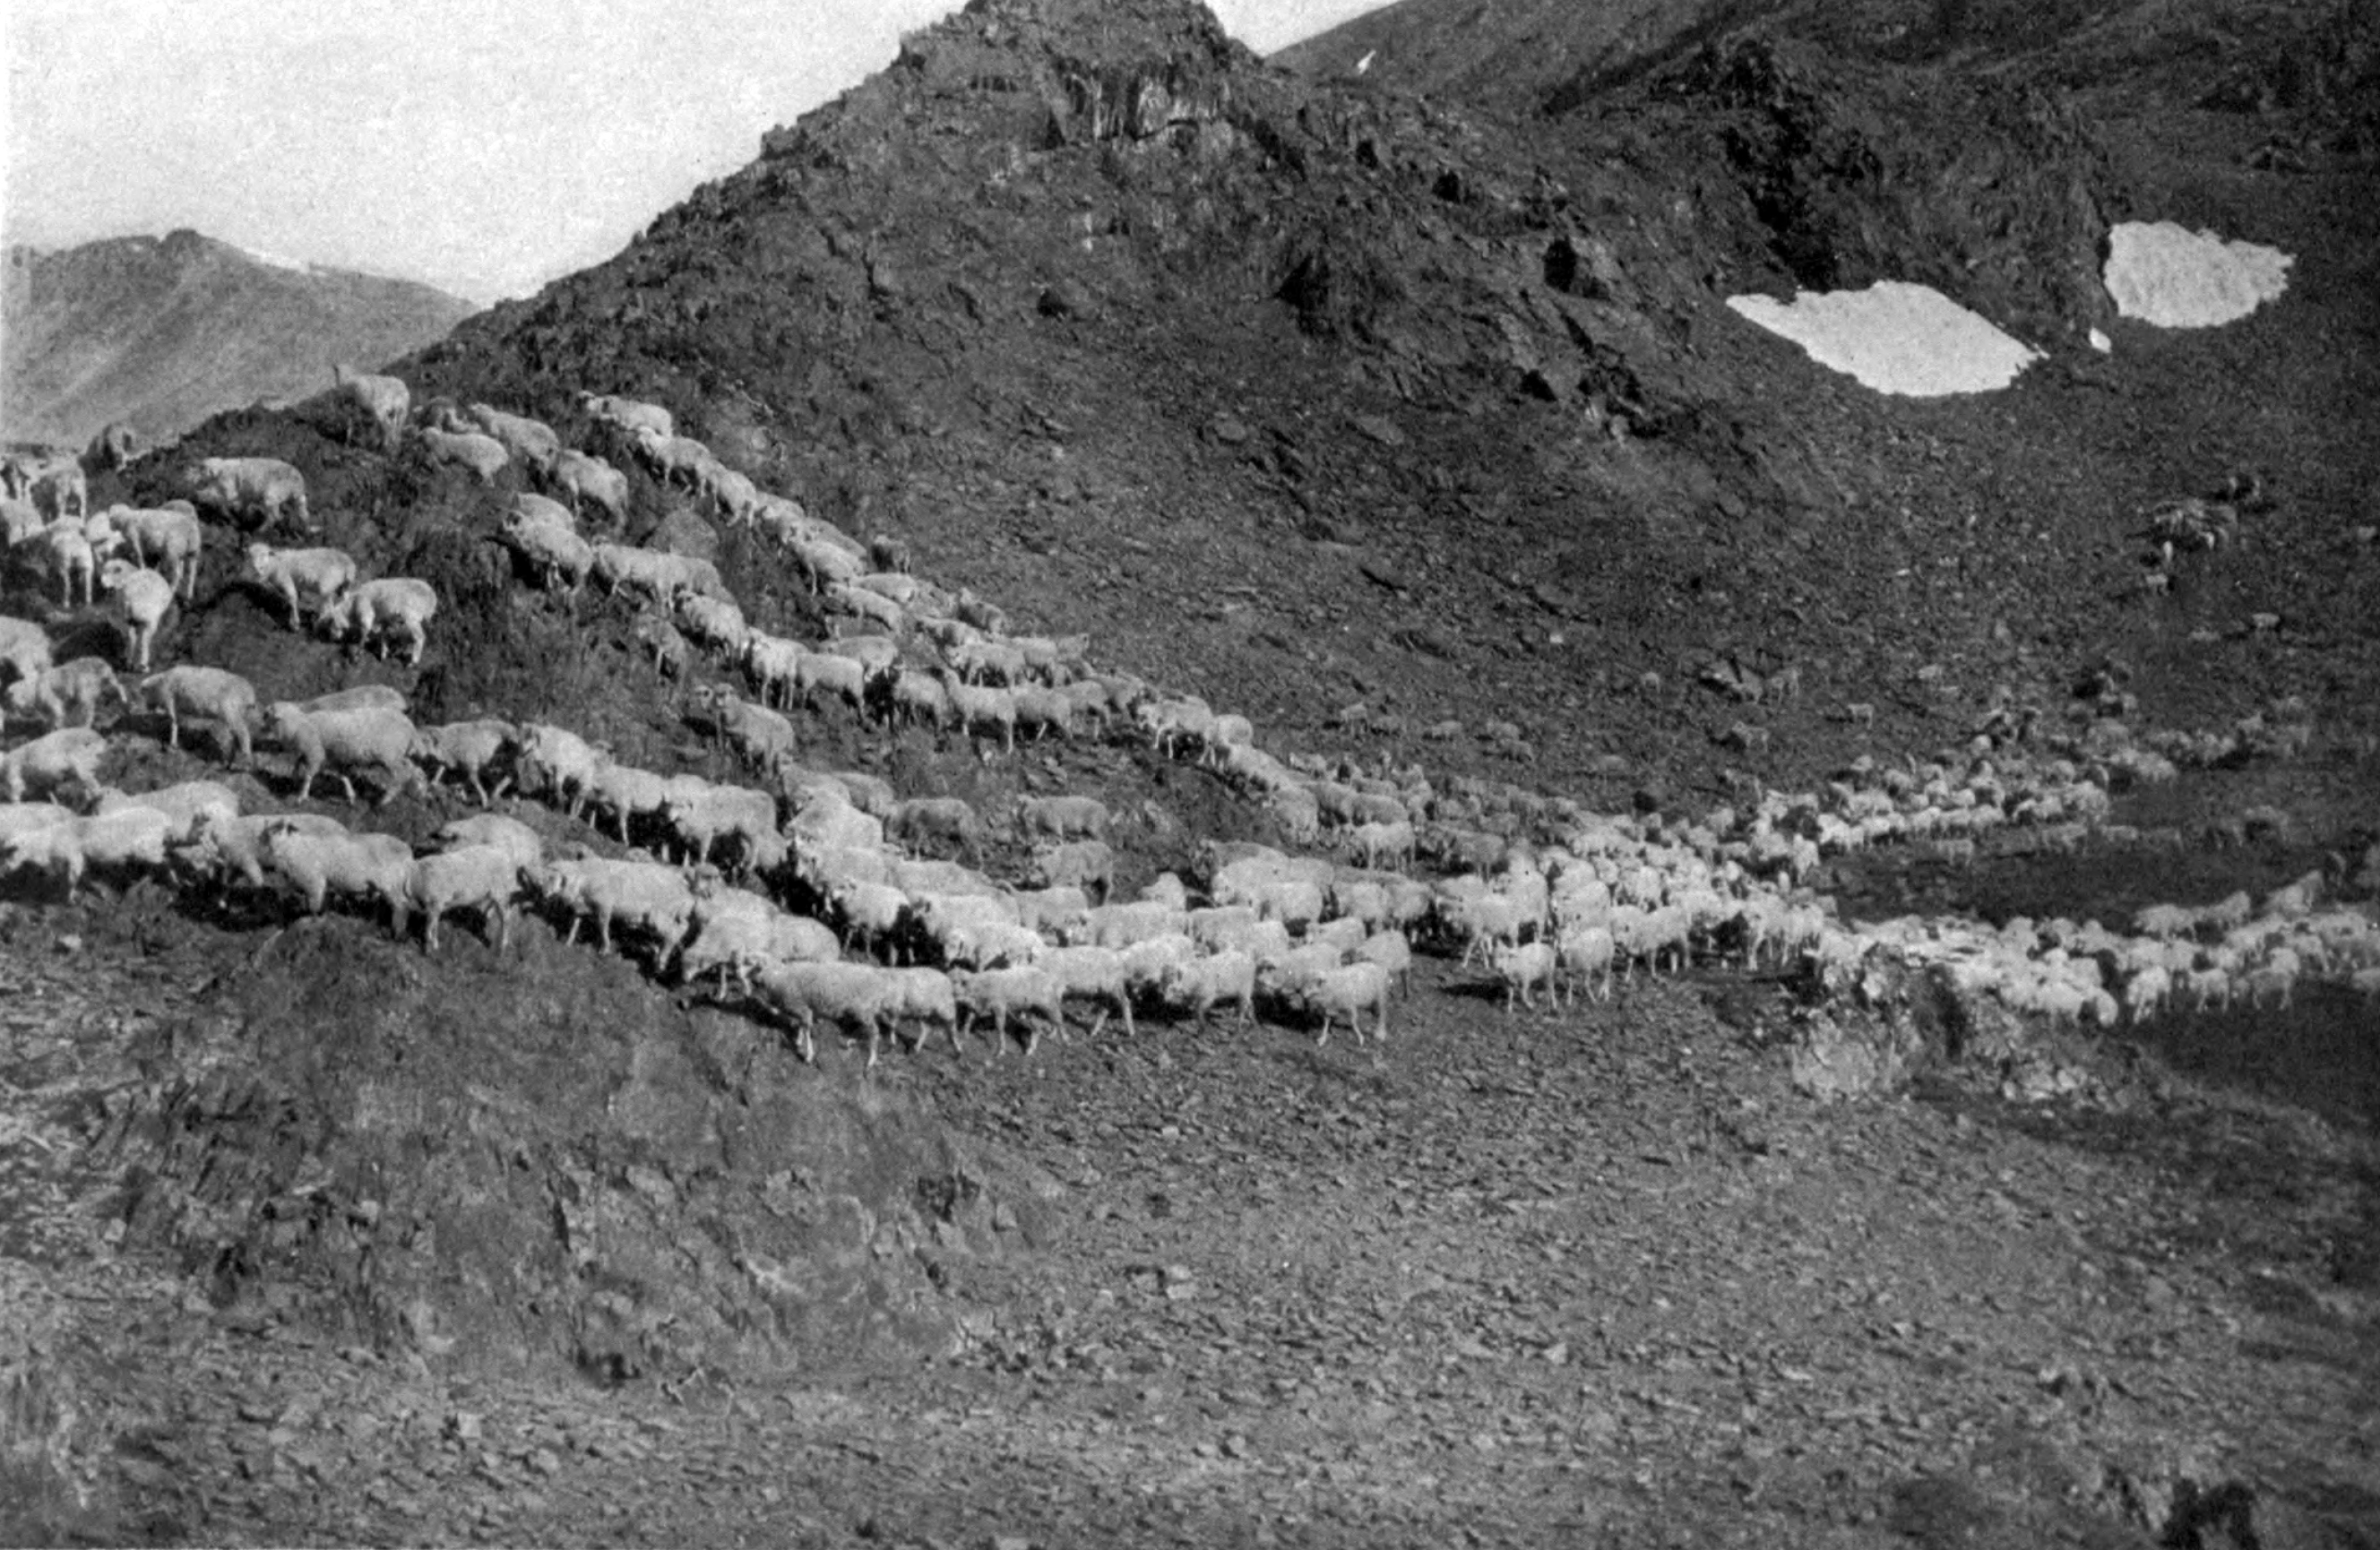 sheep-in-the-mountains.jpg